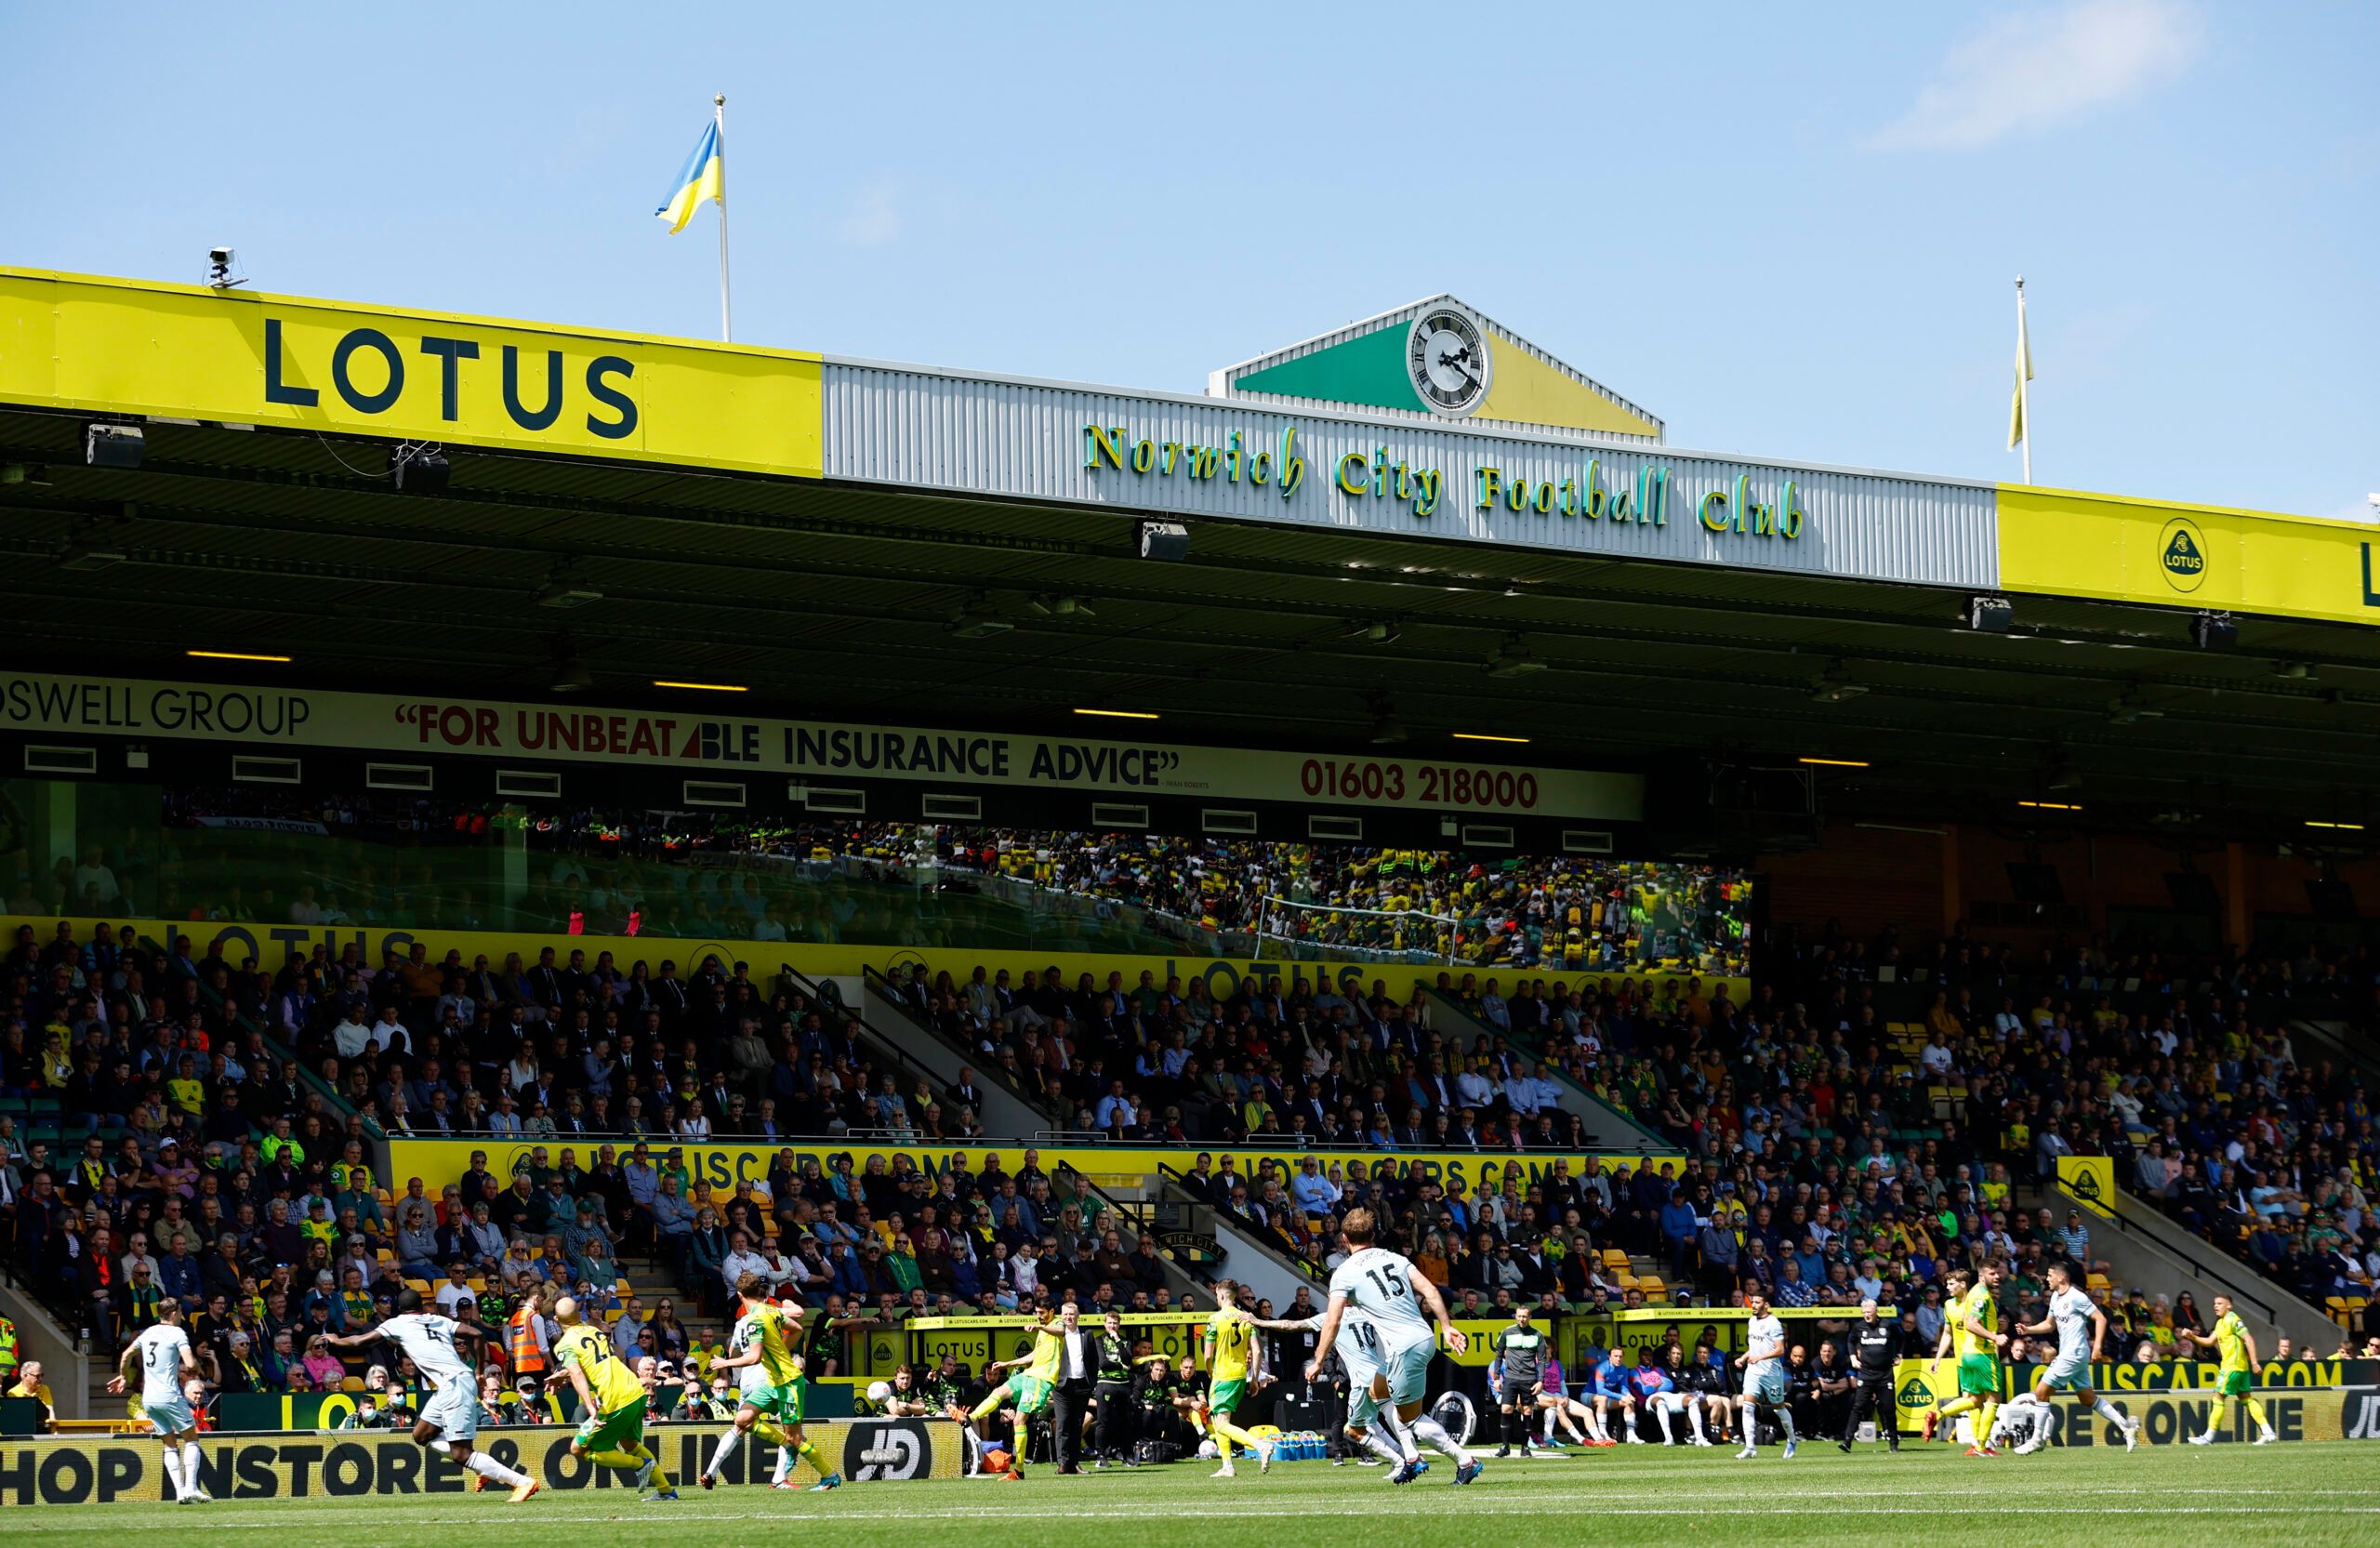 Soccer Football - Premier League - Norwich City v West Ham United - Carrow Road, Norwich, Britain - May 8, 2022 General view during the match Action Images via Reuters/Andrew Boyers EDITORIAL USE ONLY. No use with unauthorized audio, video, data, fixture lists, club/league logos or 'live' services. Online in-match use limited to 75 images, no video emulation. No use in betting, games or single club /league/player publications.  Please contact your account representative for further details.